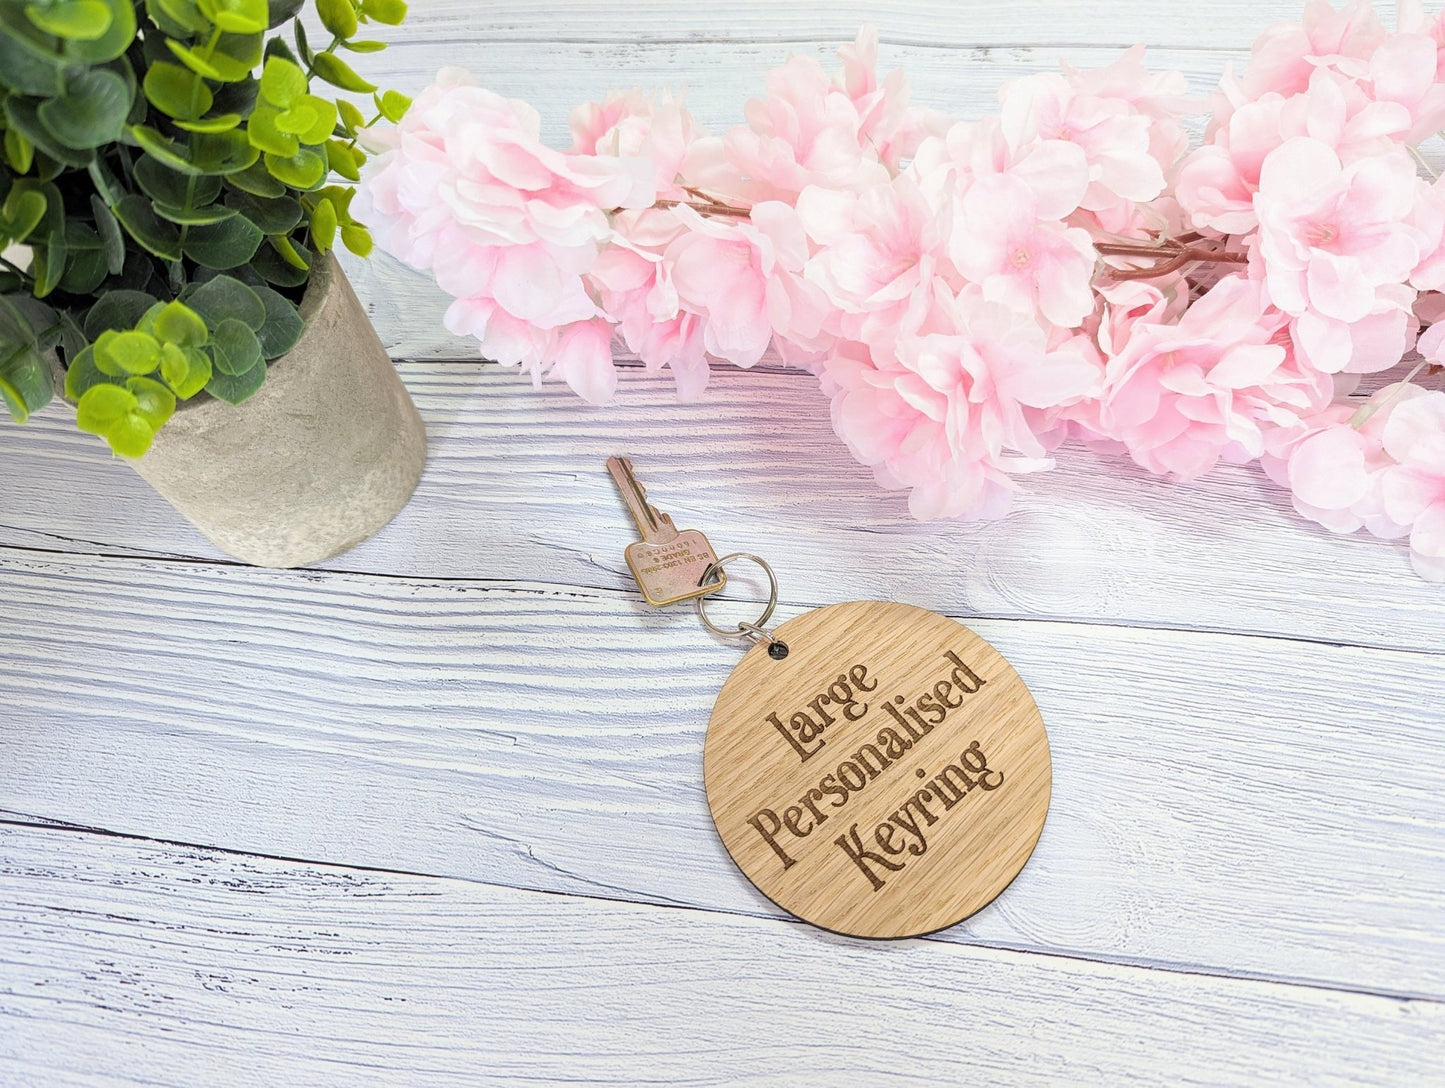 Personalised 90mm Diameter Round Wooden Keyring - Custom Engraved Text - Ideal for Special Occasions or Unique Gifts - CherryGroveCraft